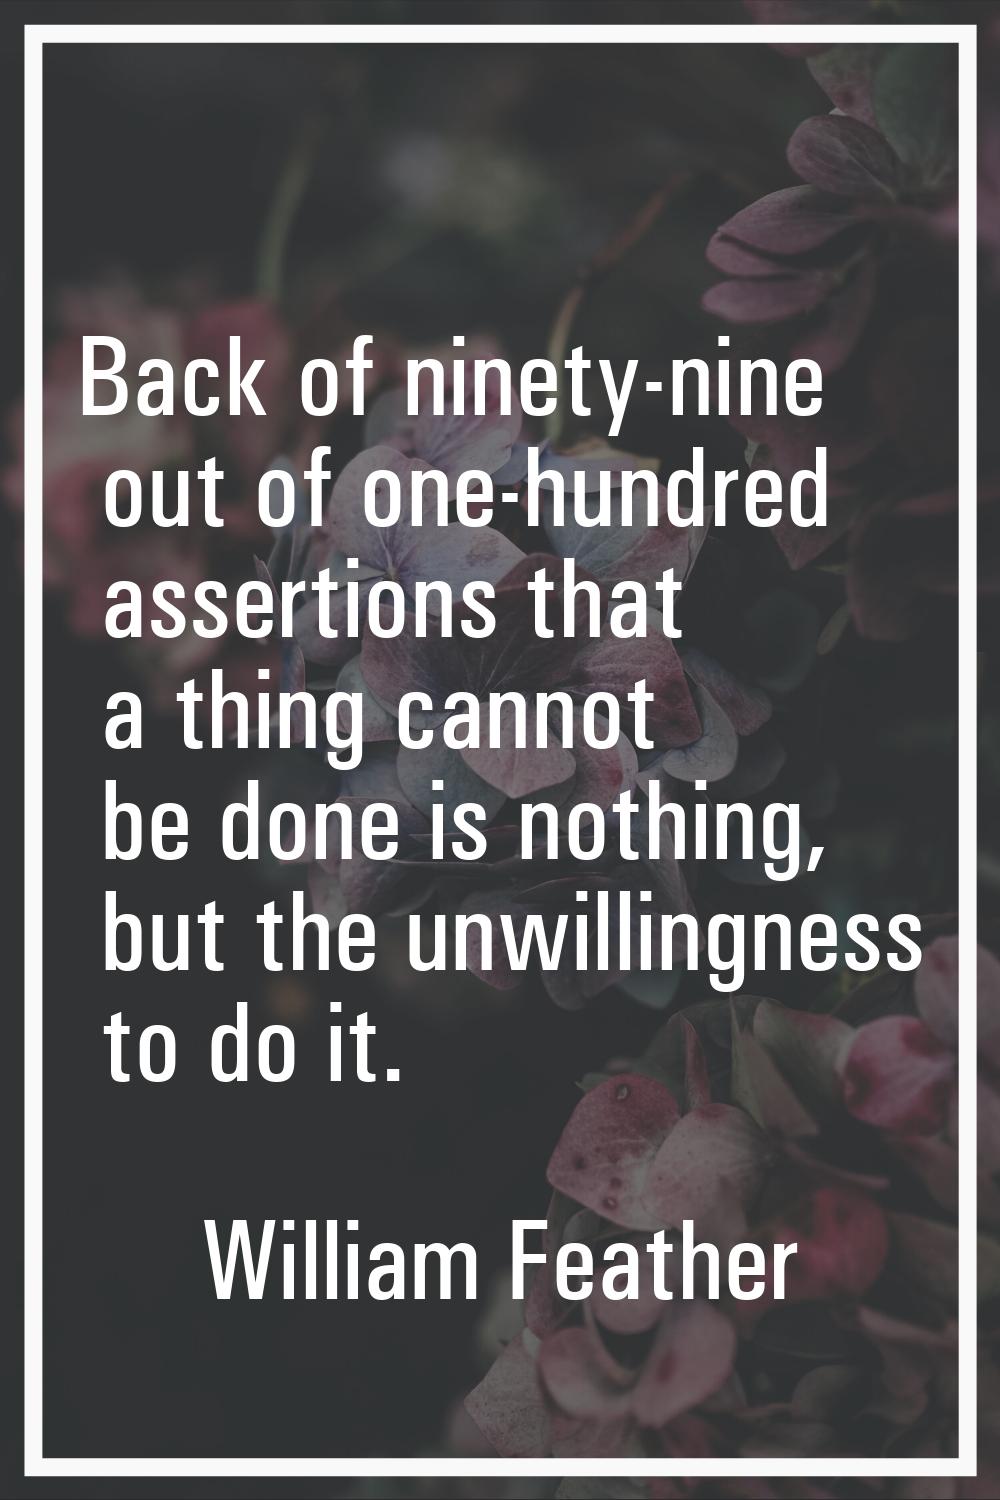 Back of ninety-nine out of one-hundred assertions that a thing cannot be done is nothing, but the u